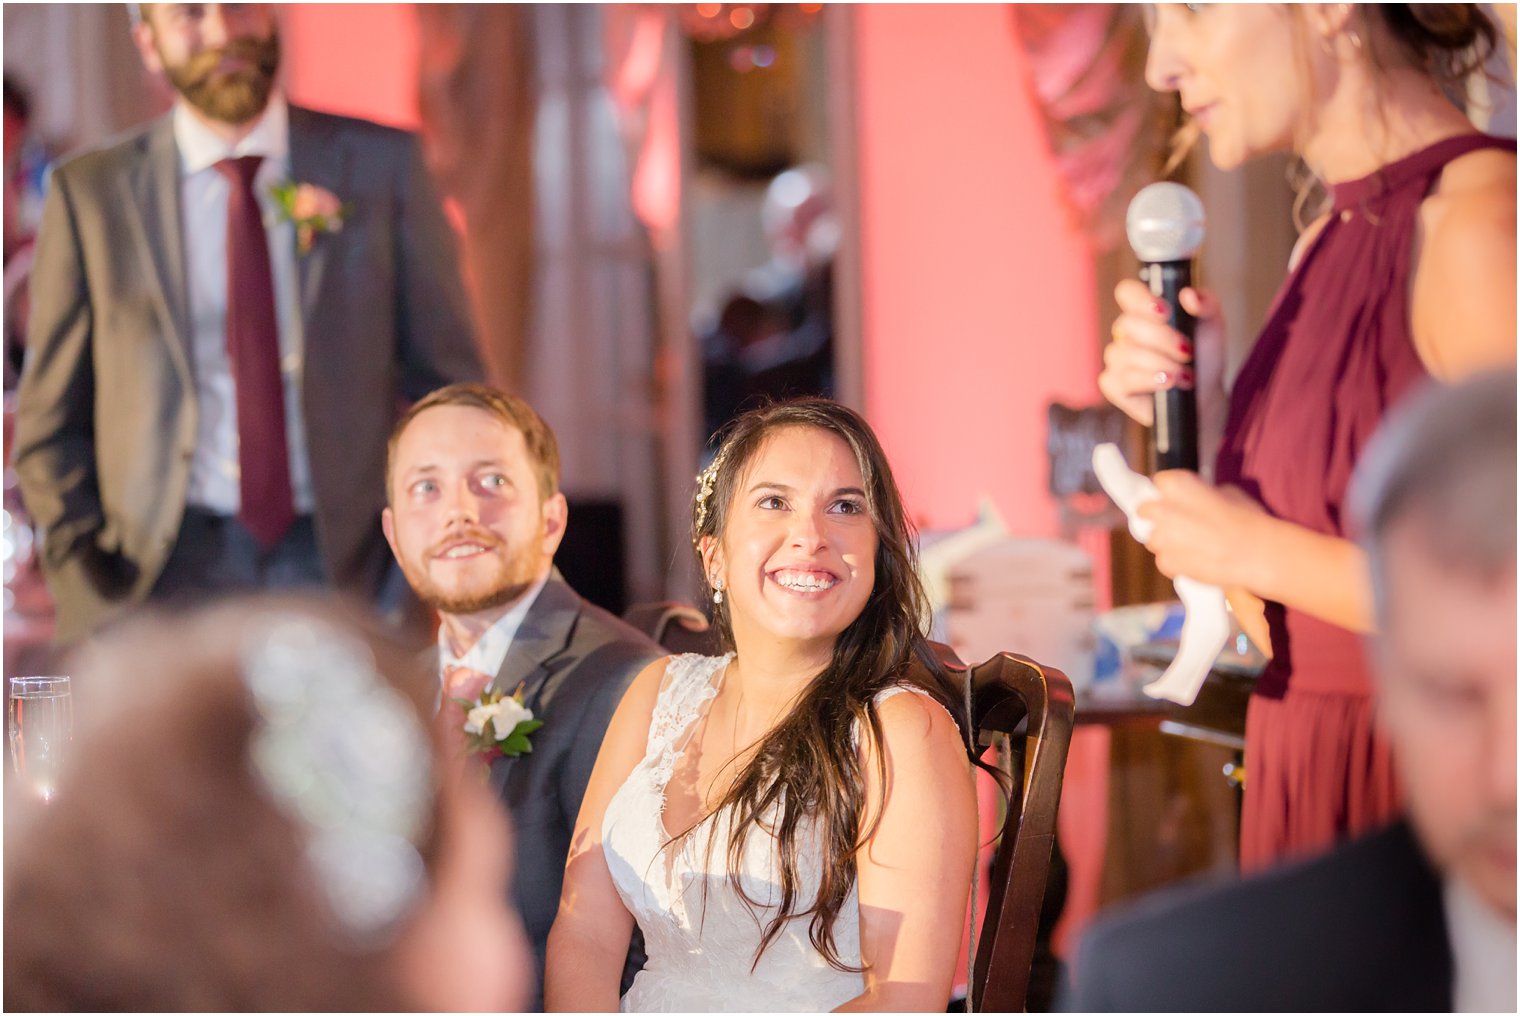 wedding toasts during reception at Olde Mill Inn photographed by Idalia Photography